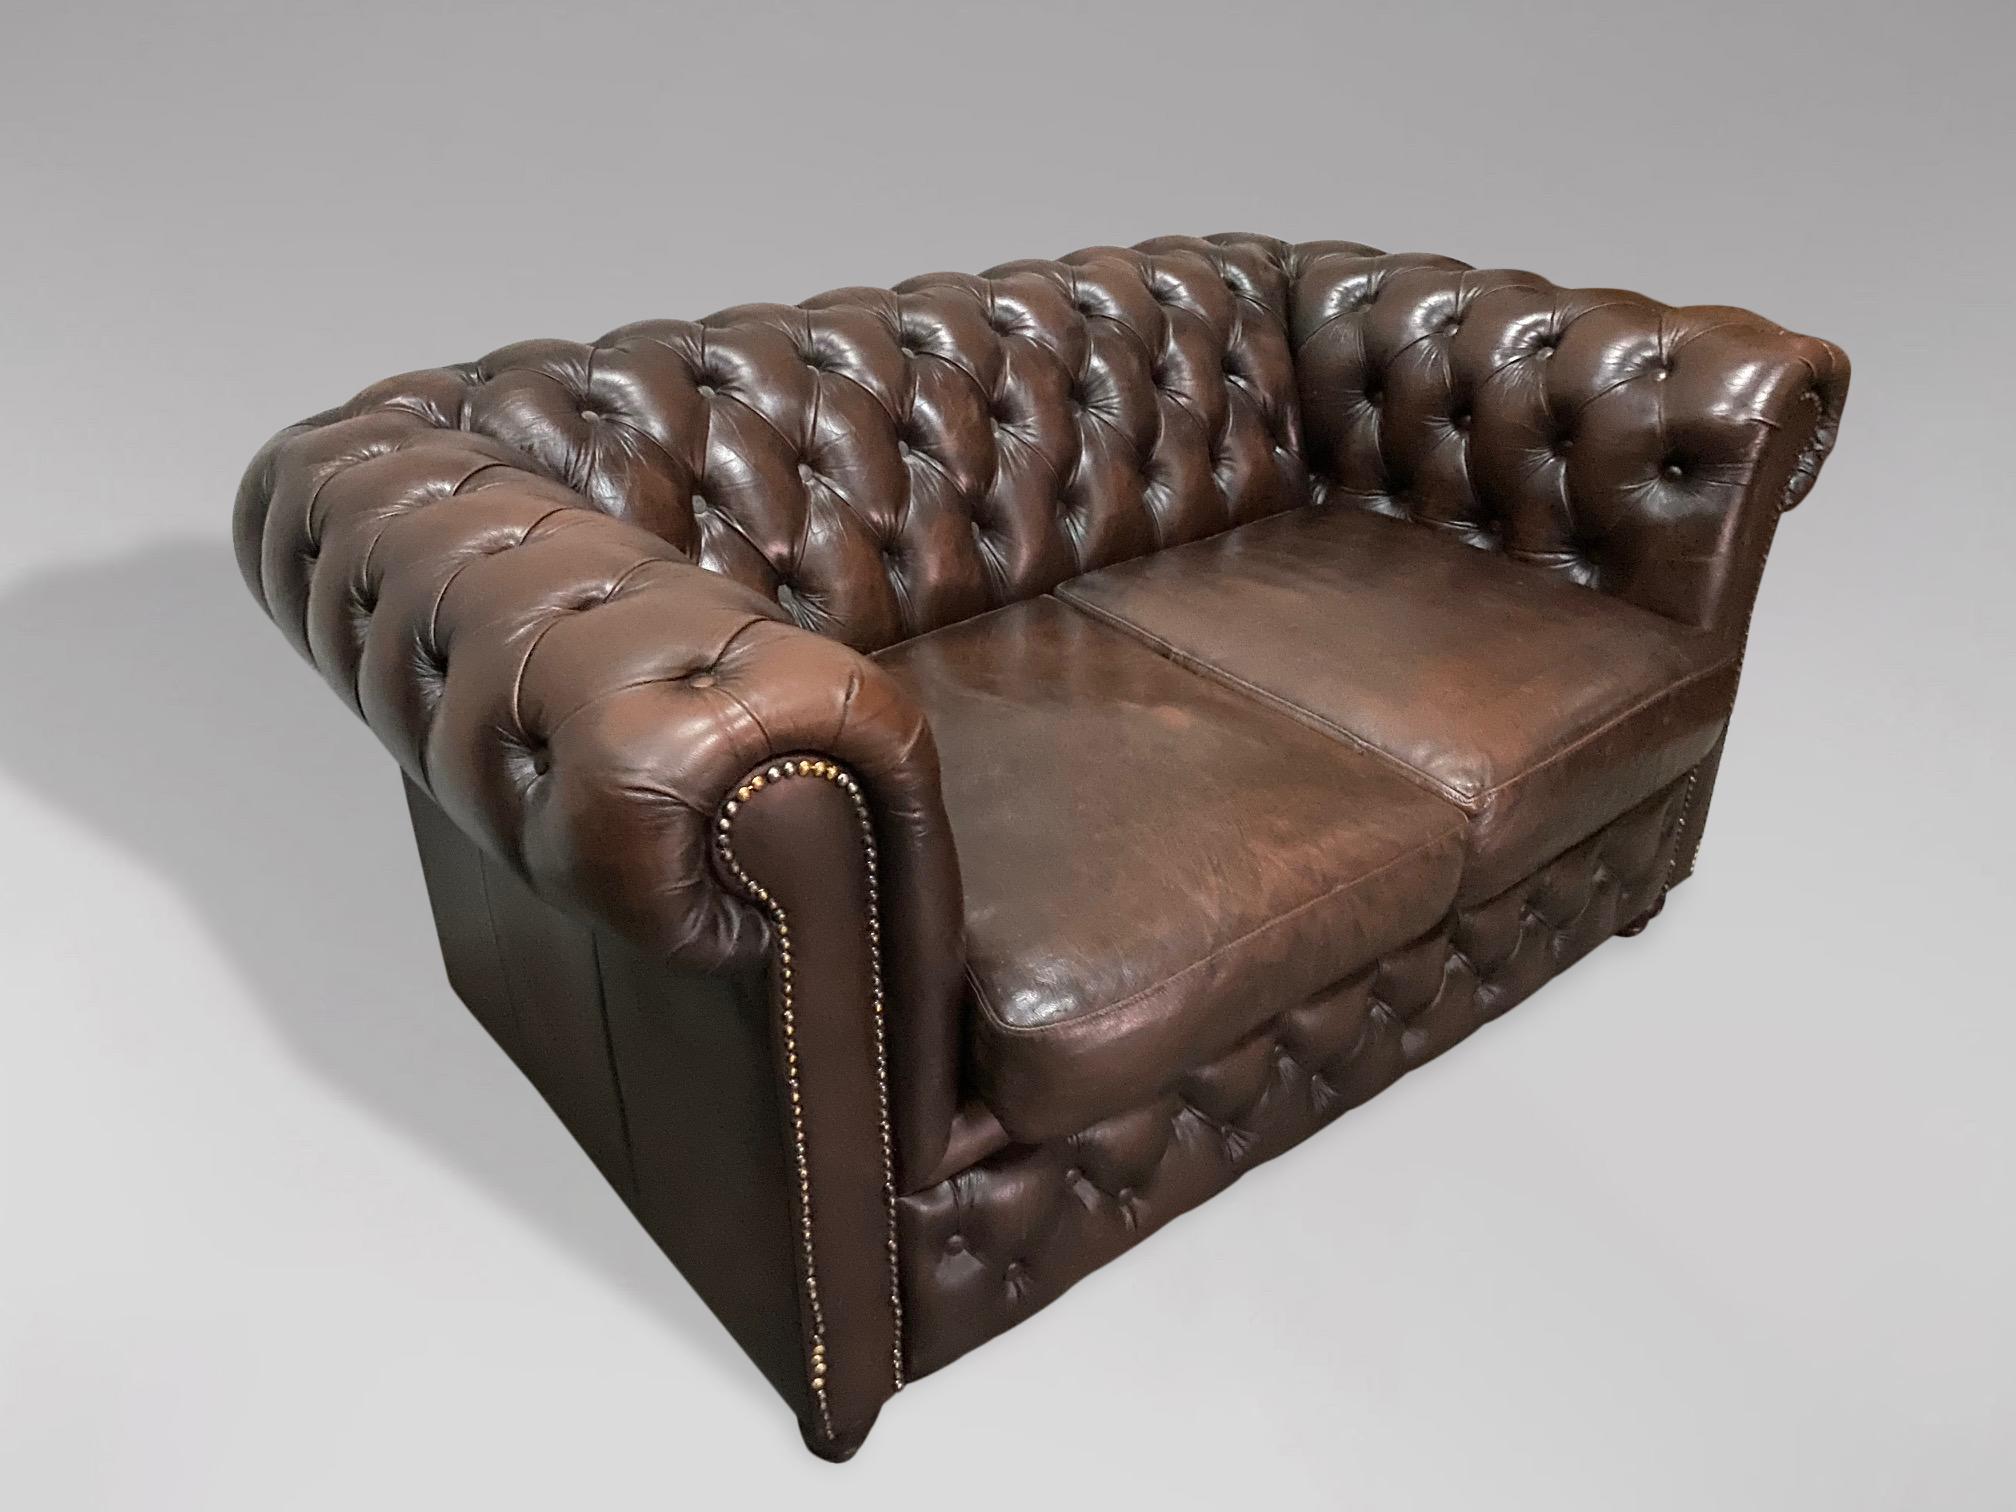 British 20th Century Vintage Brown Leather 2 Seater Chesterfield Sofa